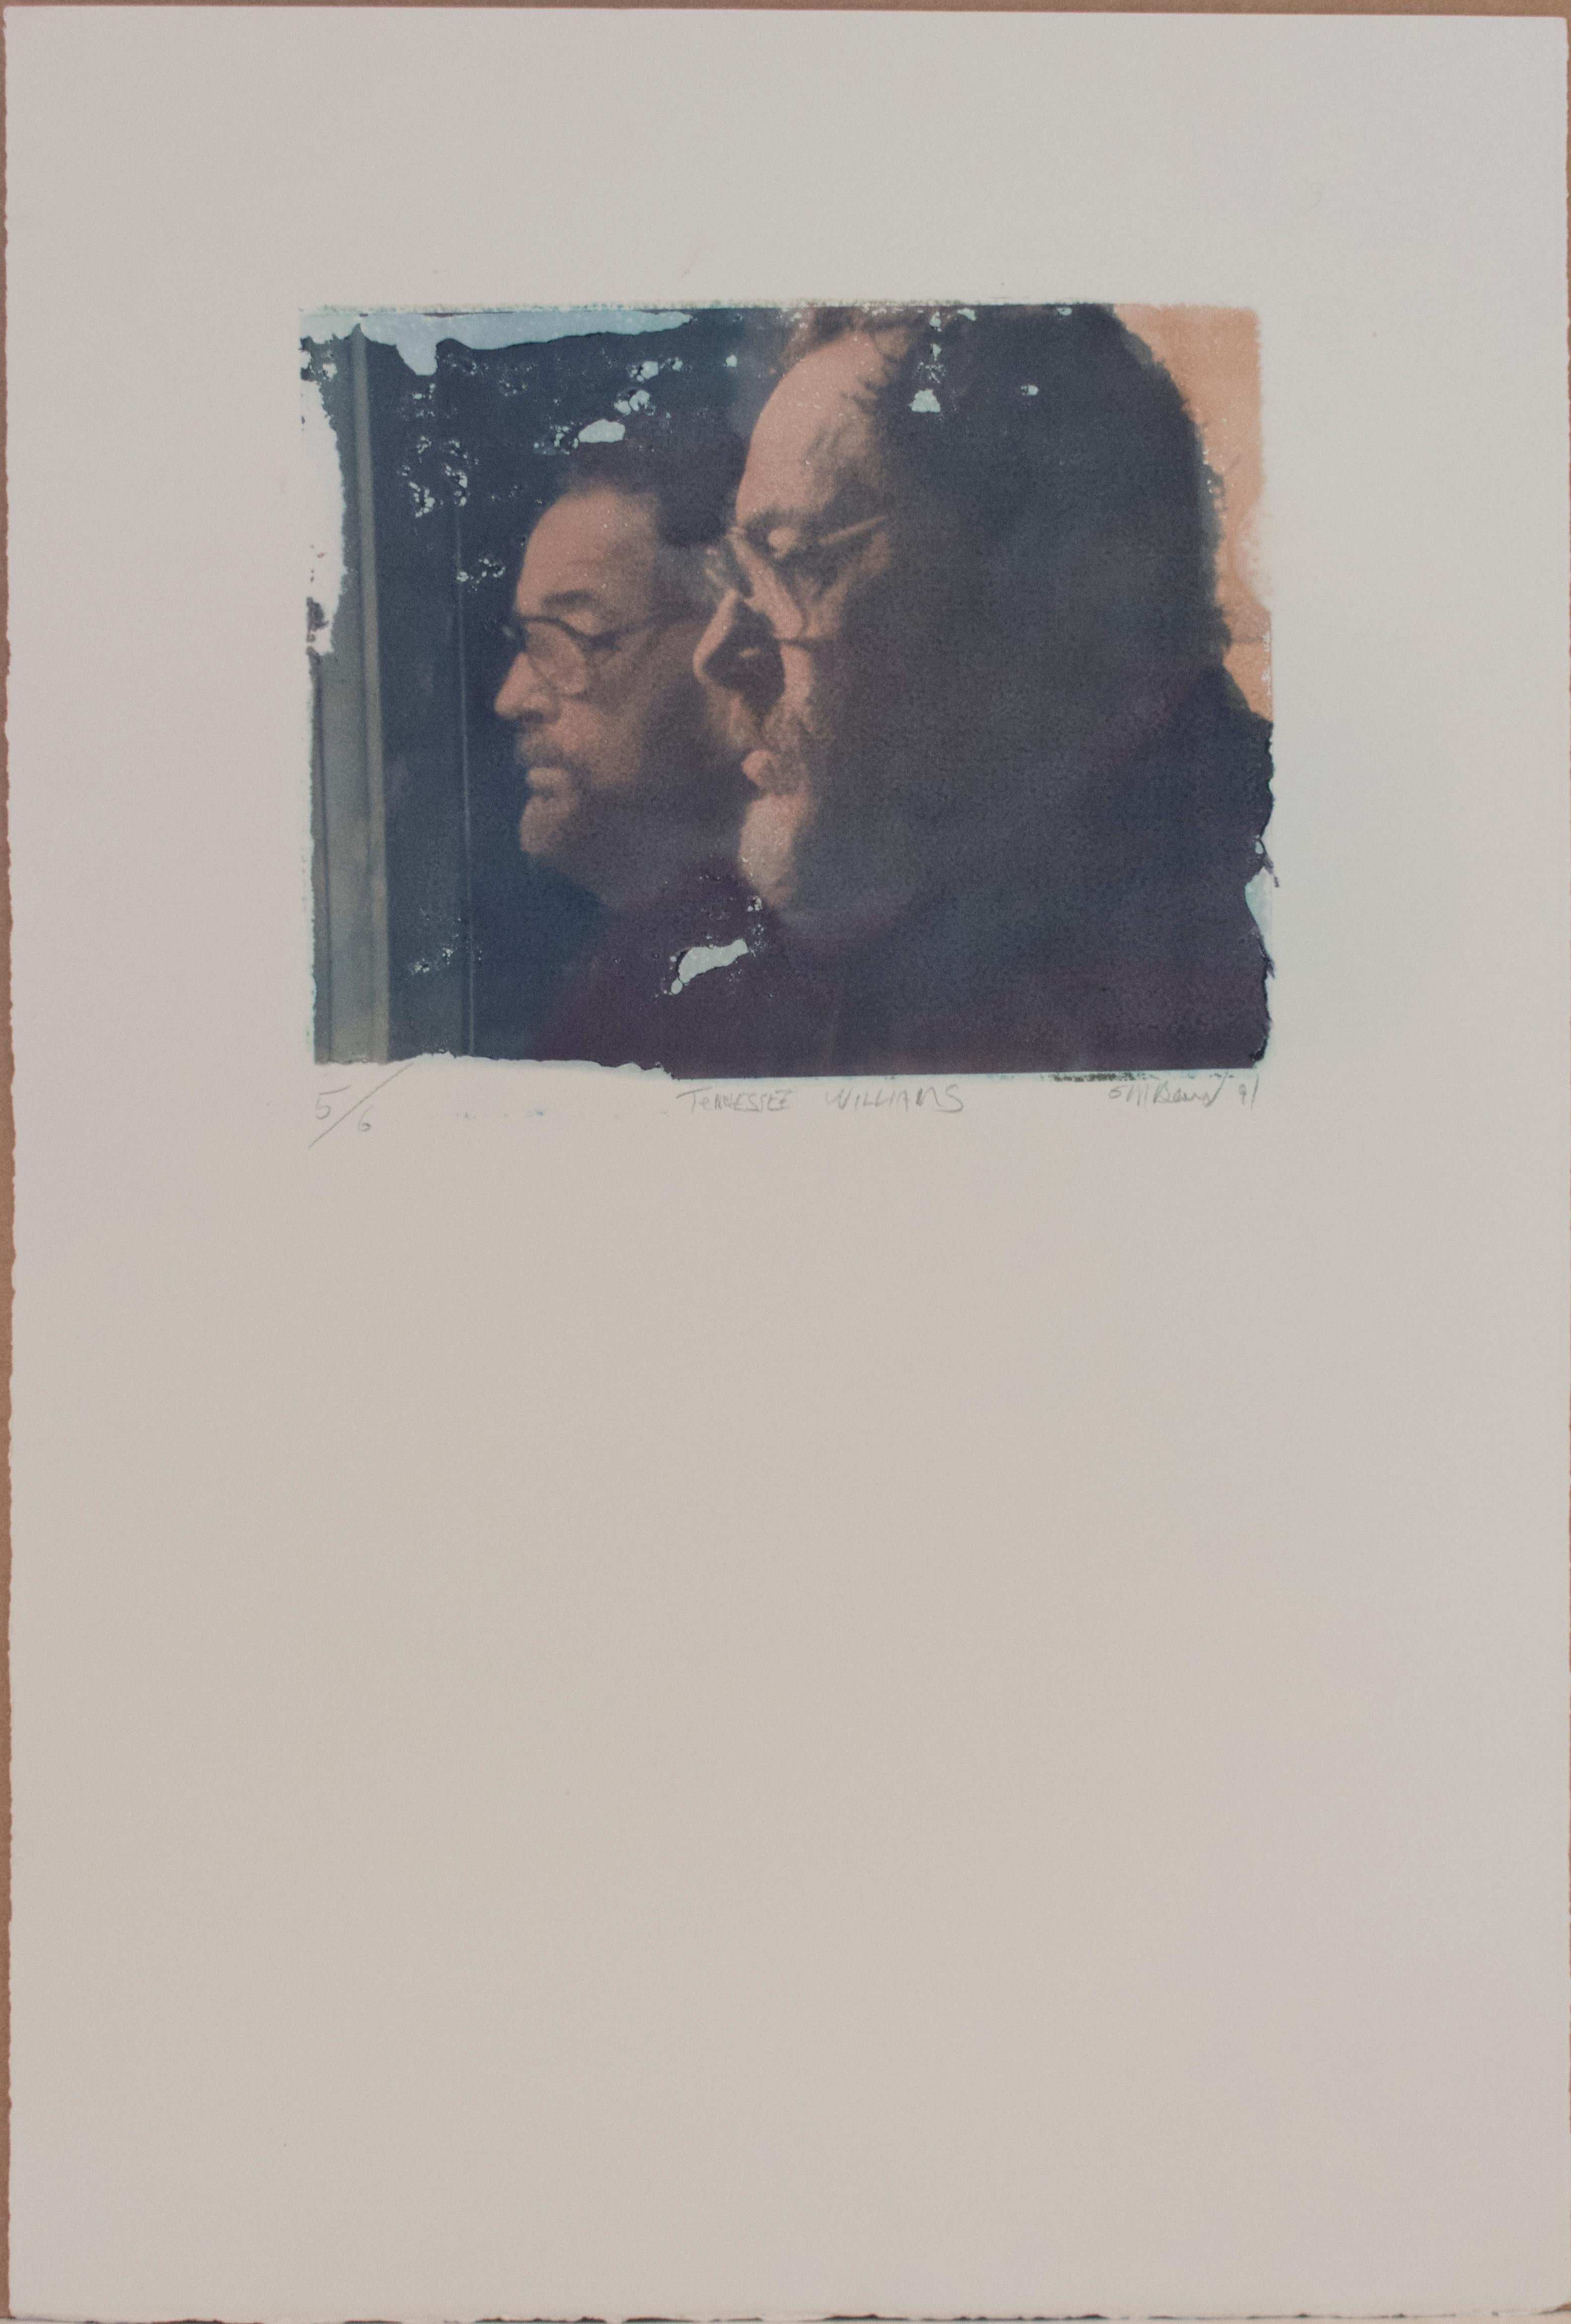 Tennessee Williams (Polaroid Transfer of American Playwright his Reflection) - Photograph by Mark Beard